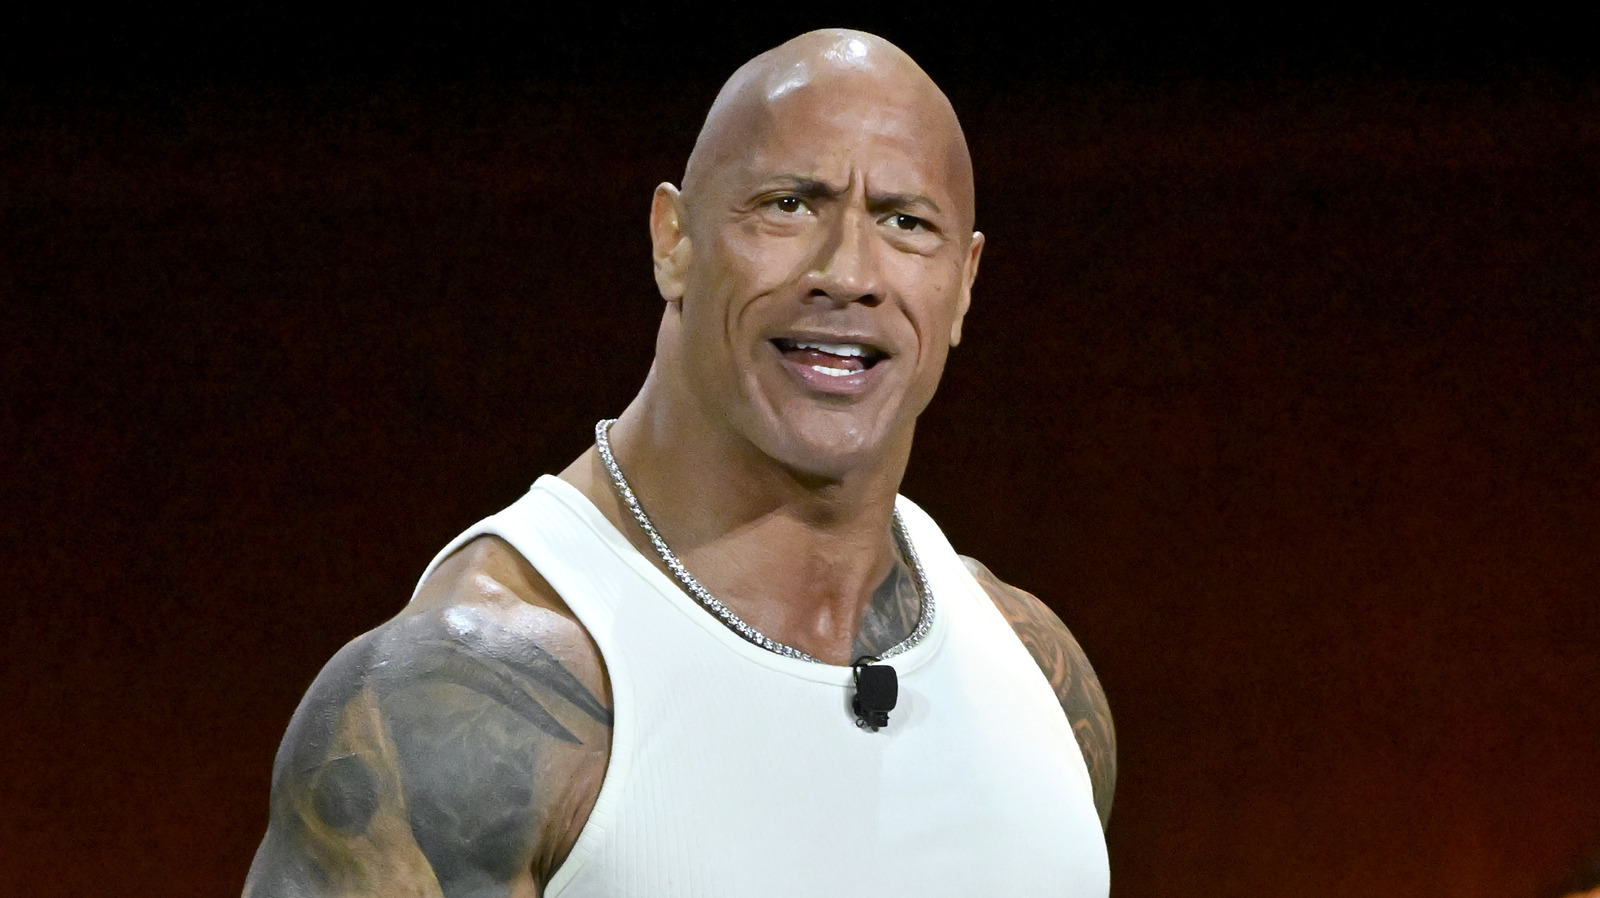 Report questions WWE's Dwayne 'The Rock' Johnson's professionalism in Hollywood